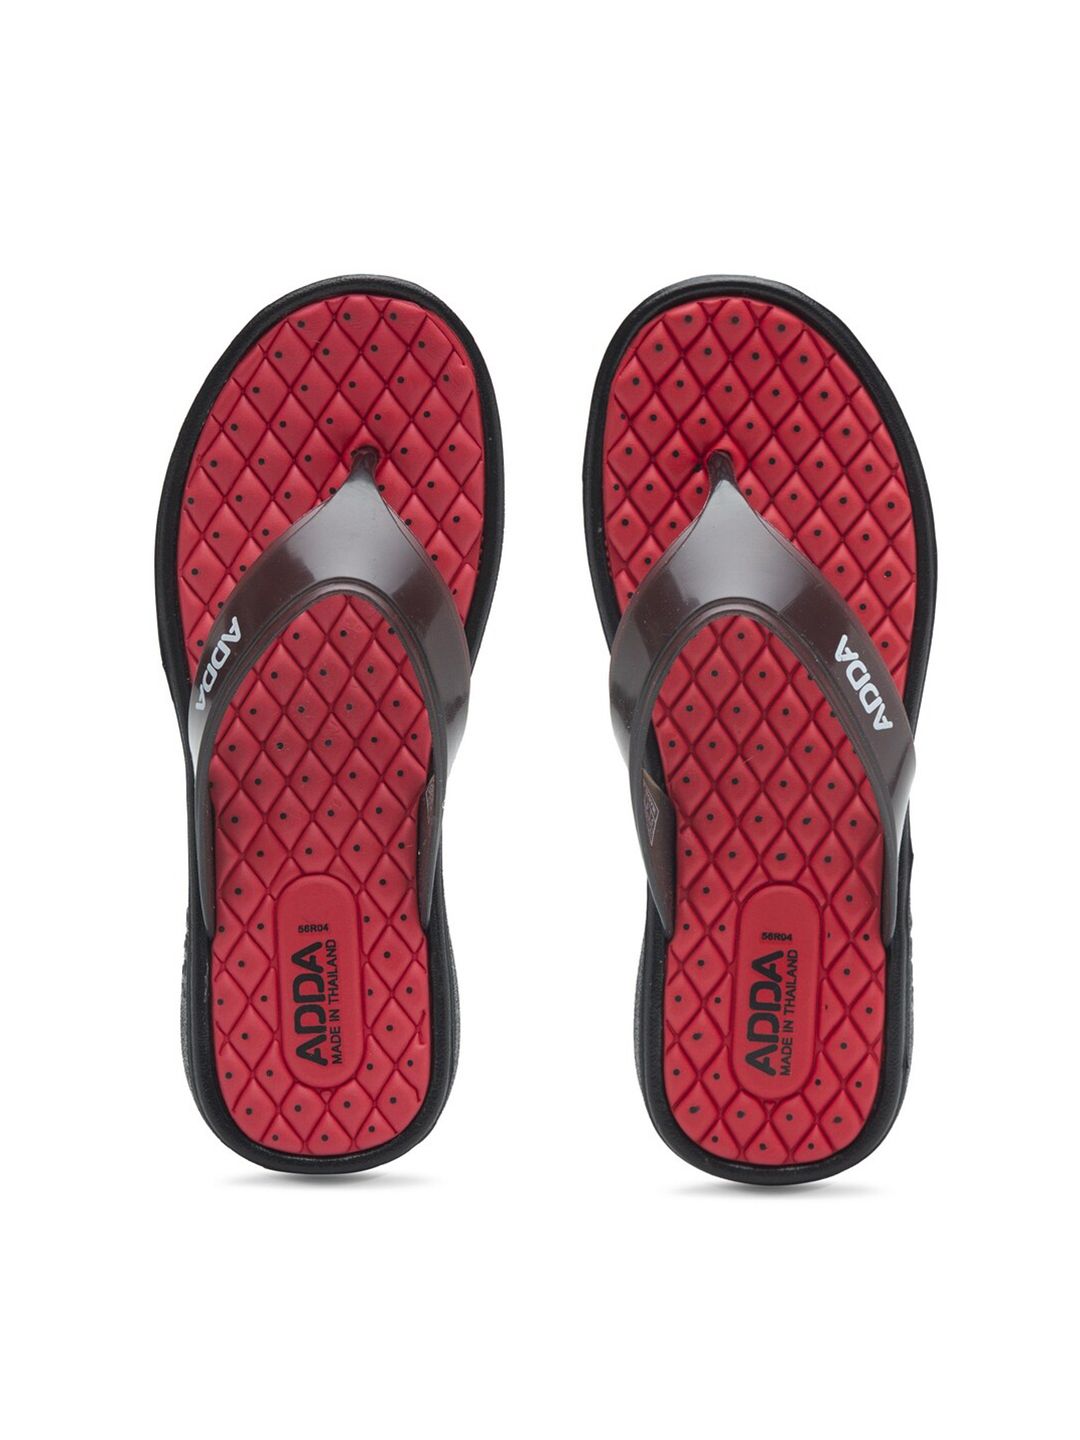 Adda Women Red & Brown Rubber Thong Flip-Flops Price in India